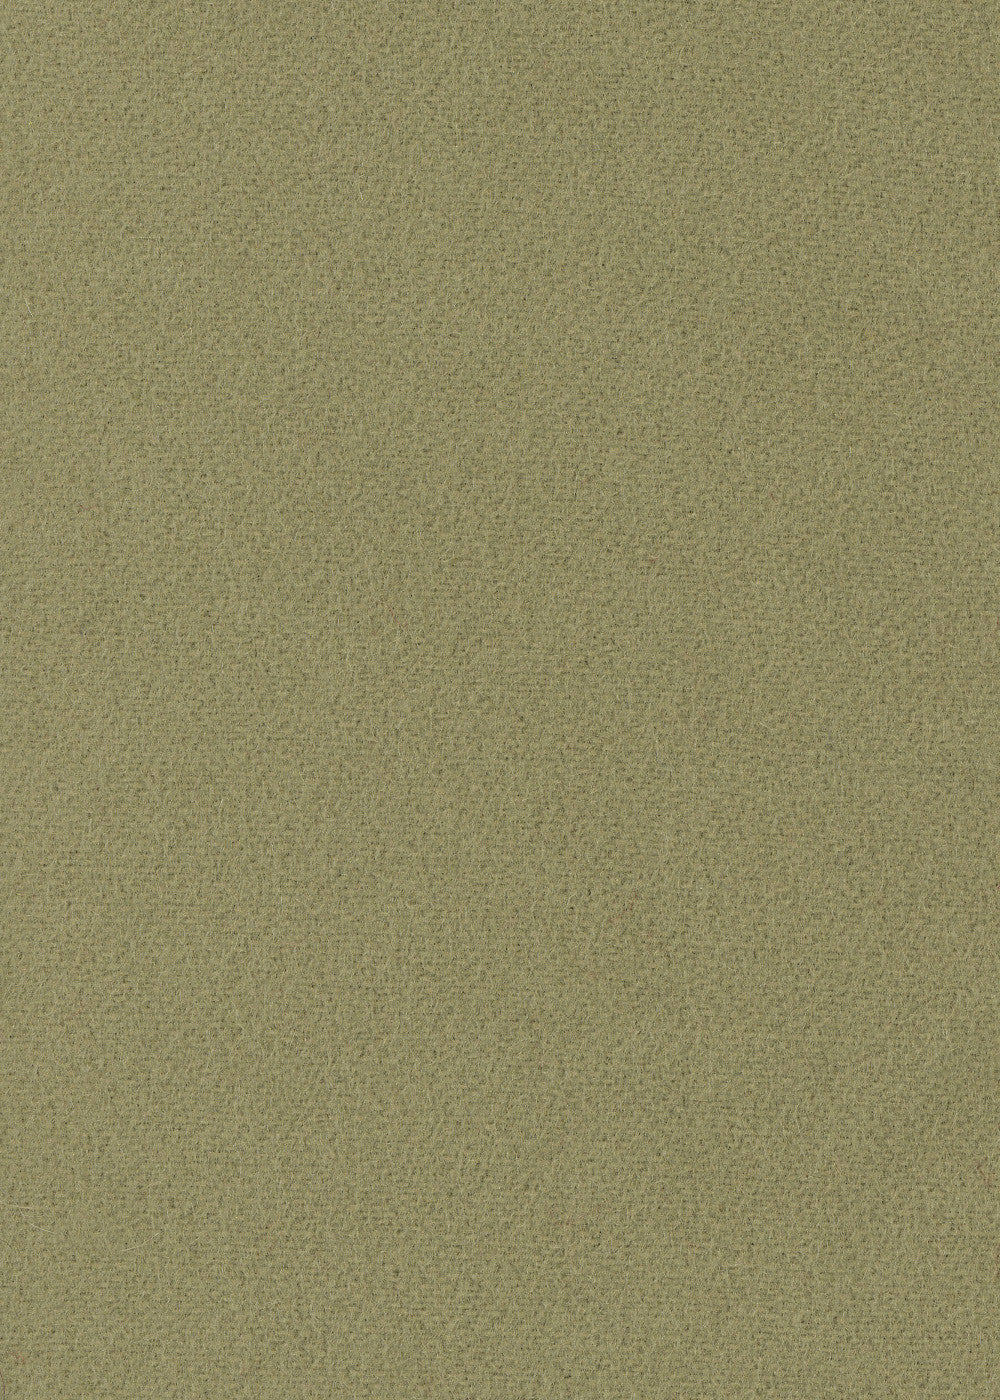 green cashmere wool fabric for upholstery